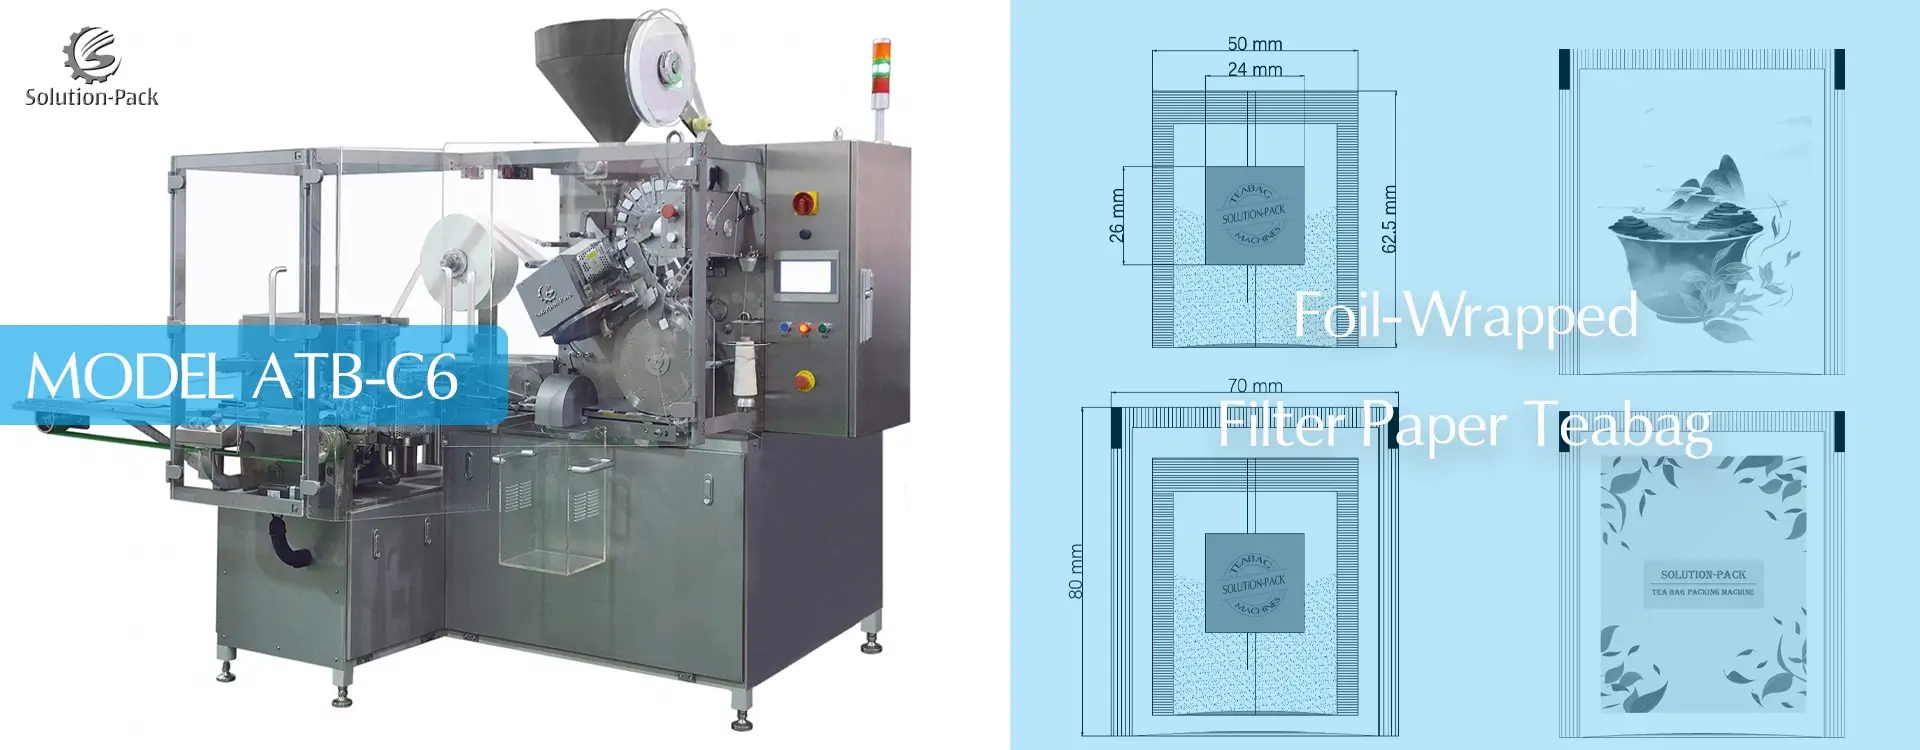 Model ATB-C6 Foil-Wrapped Filter Teabag Packing Machine | Solution-Pack